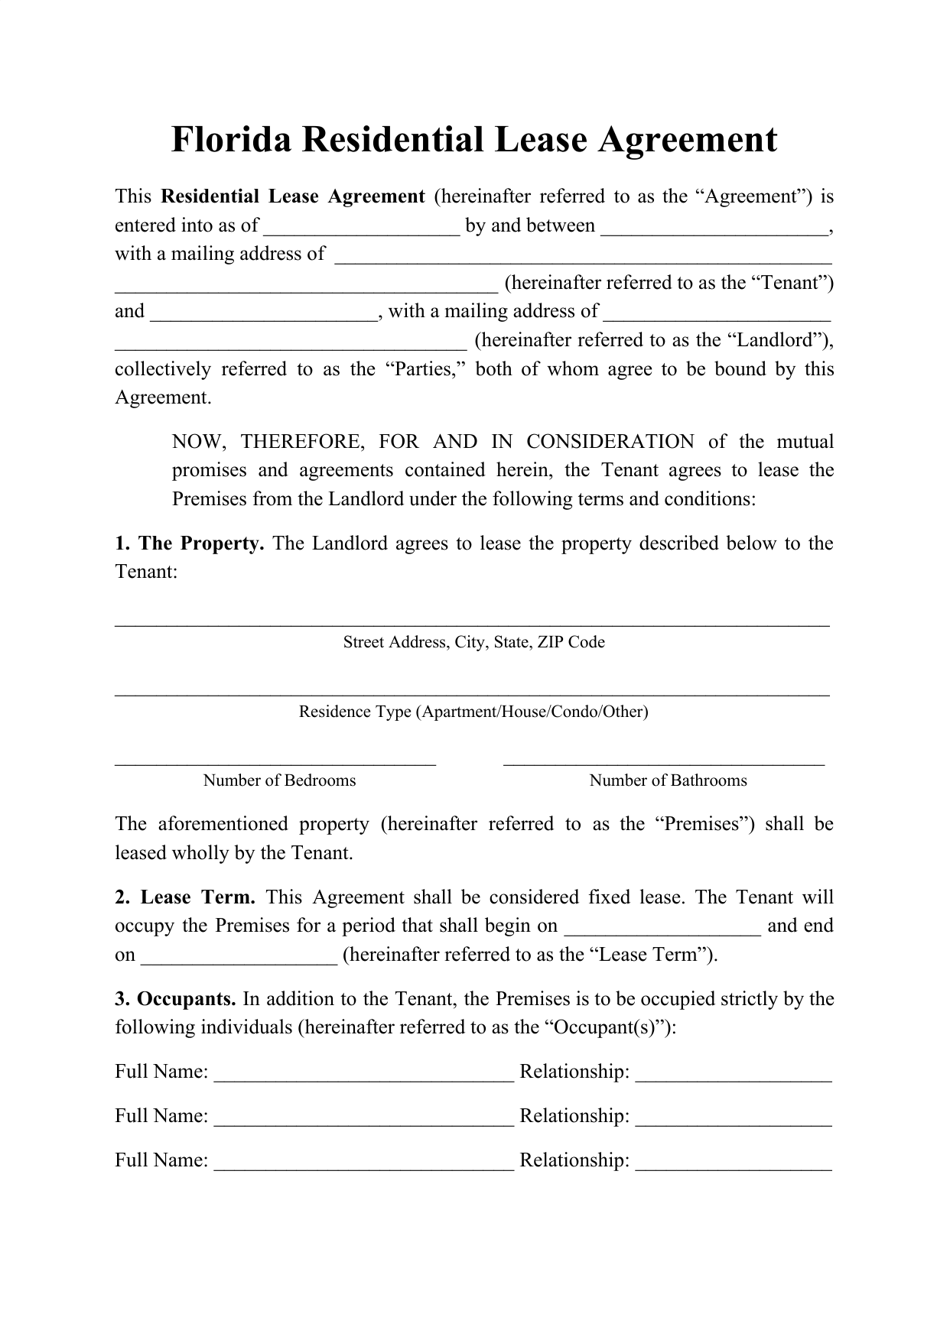 Residential Lease Agreement Template - Florida, Page 1